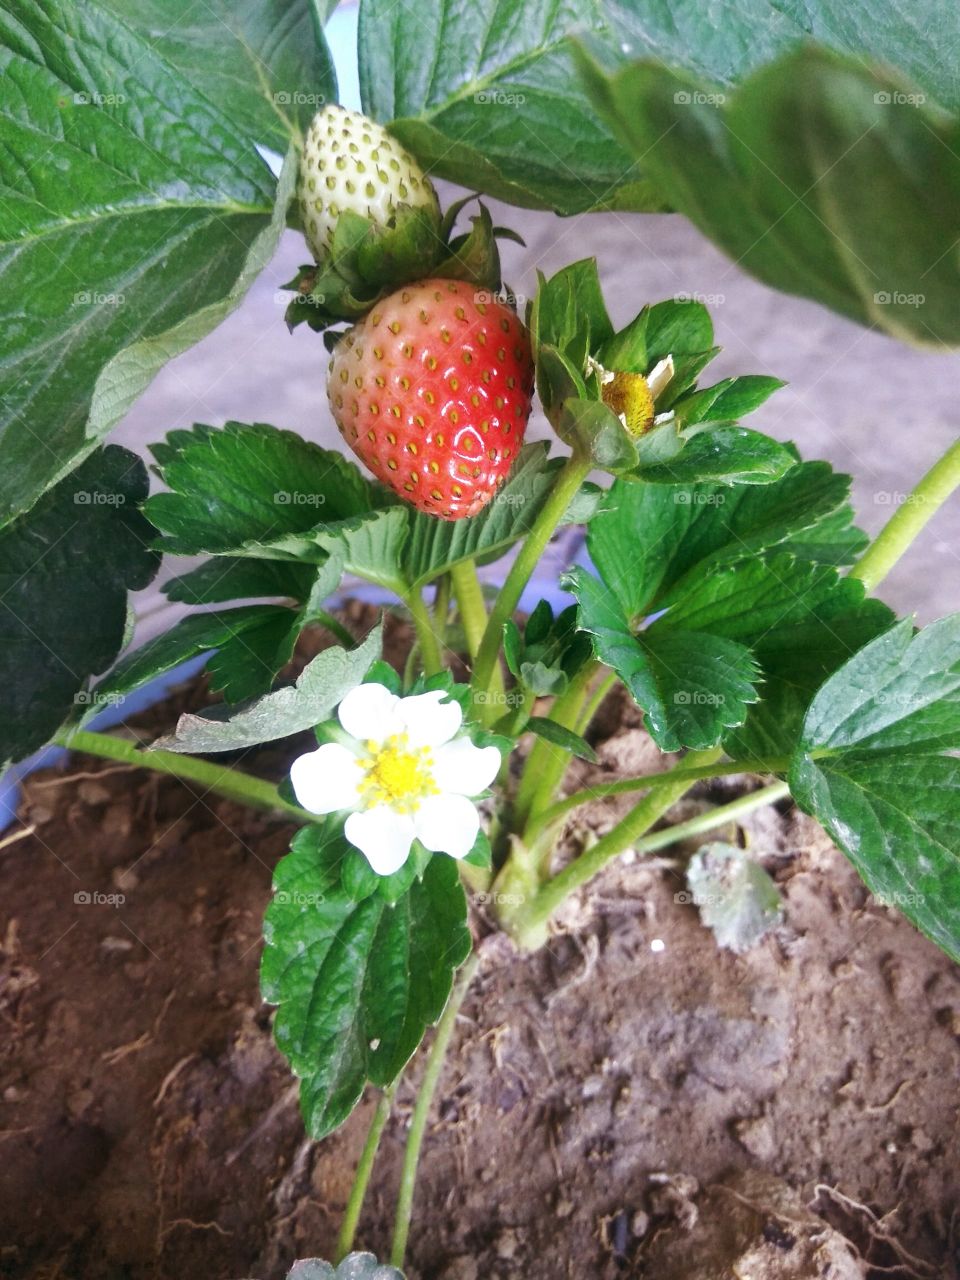 "strawberry" In my home plant it's amazing awesome.......